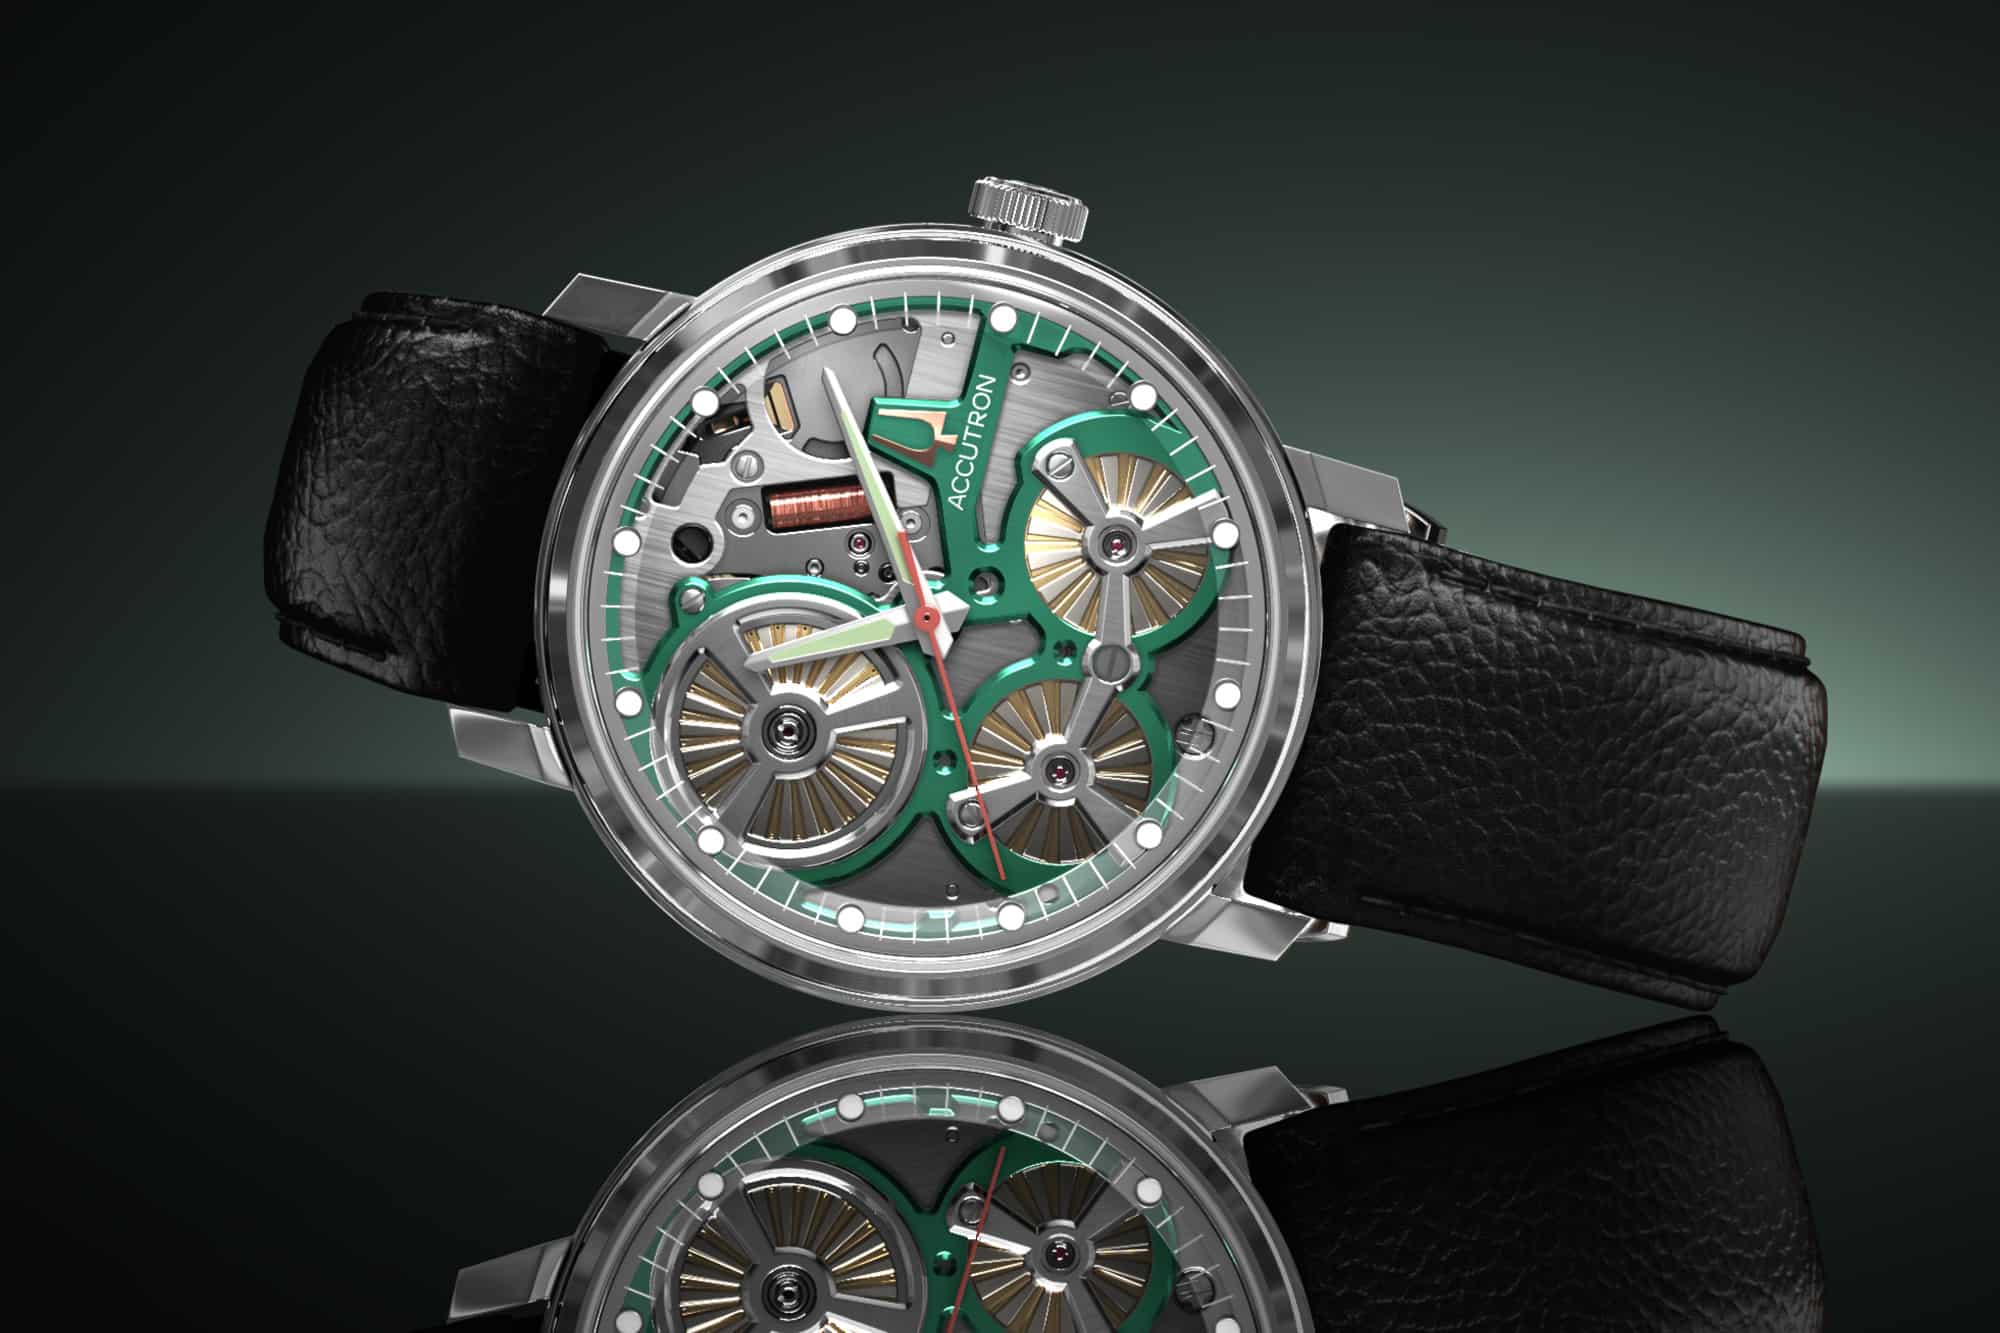 Introducing the Accutron Spaceview 2020 